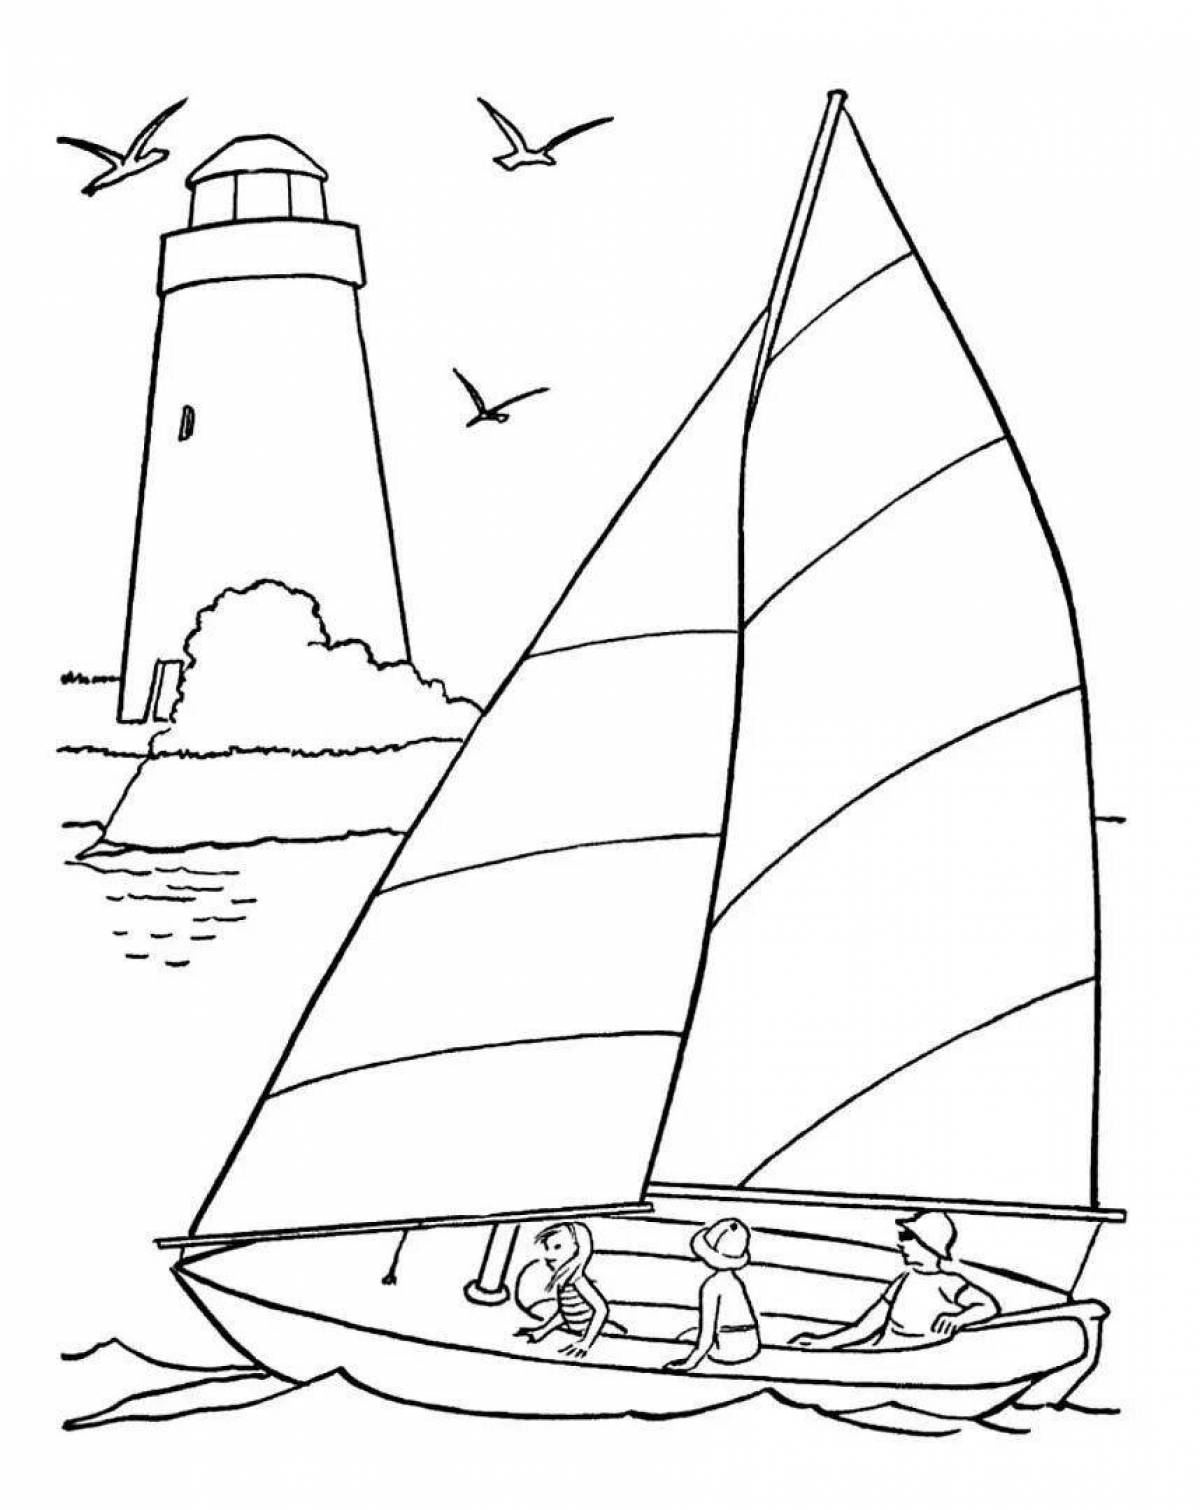 Great sailing ship coloring page for students